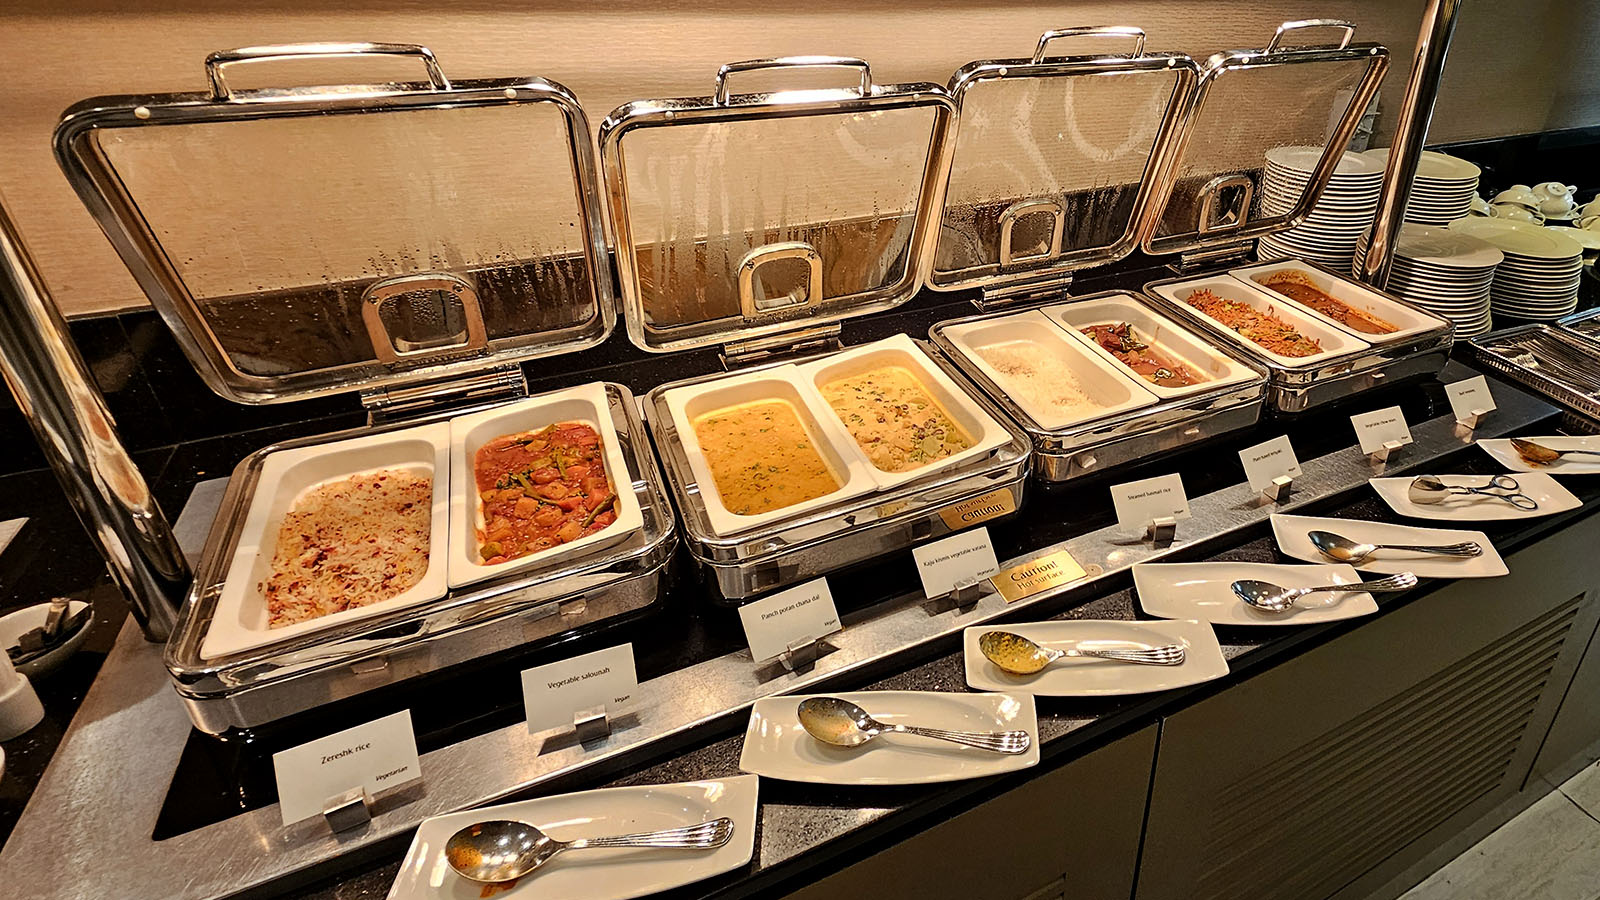 Buffet choices in the Emirates Business Class Lounge, Dubai T3 Concourse C